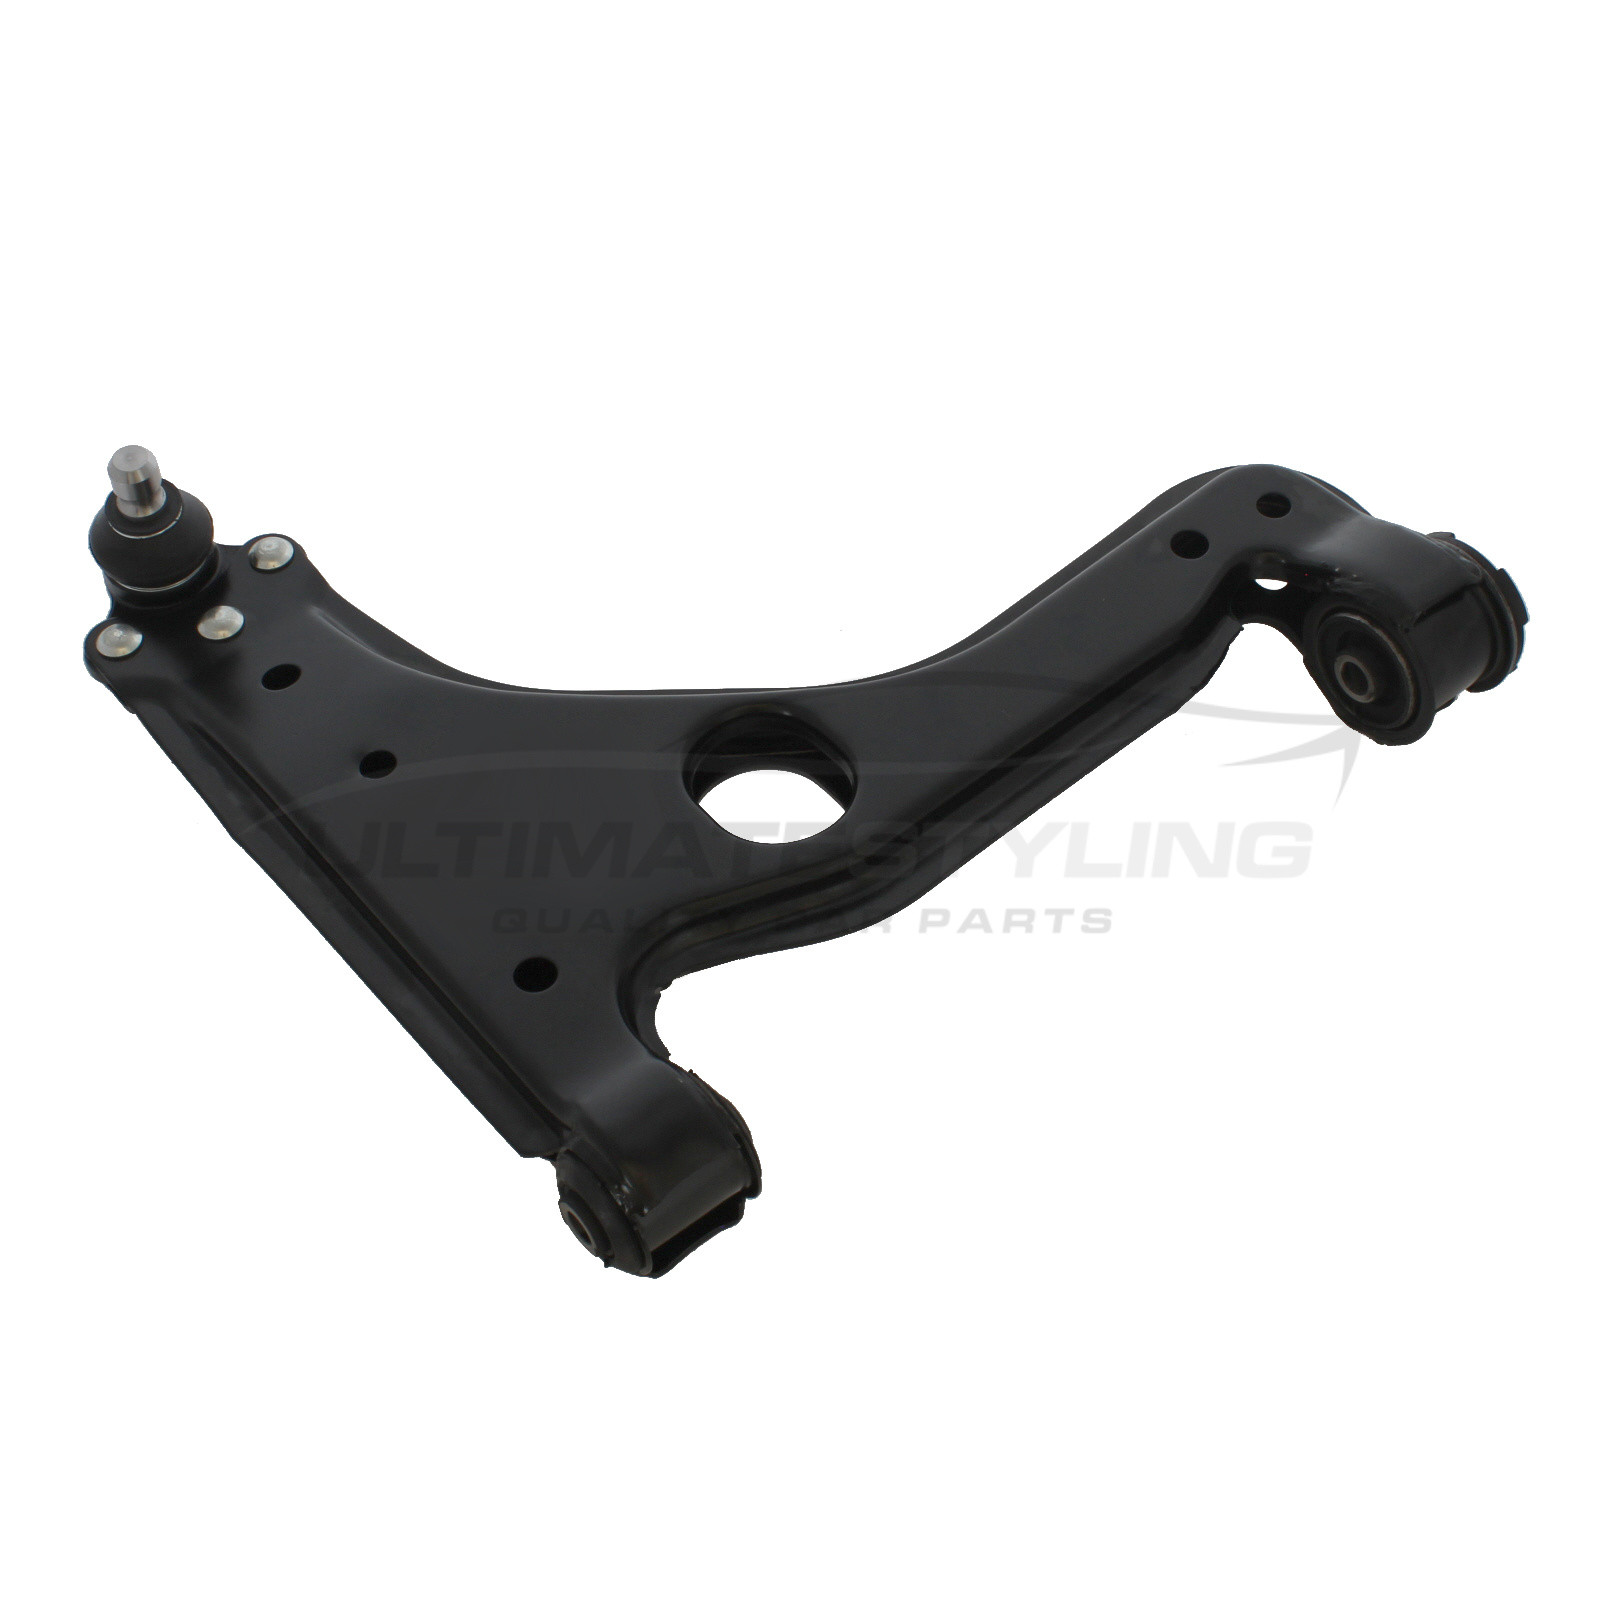 Suspension Arm for Vauxhall Zafira